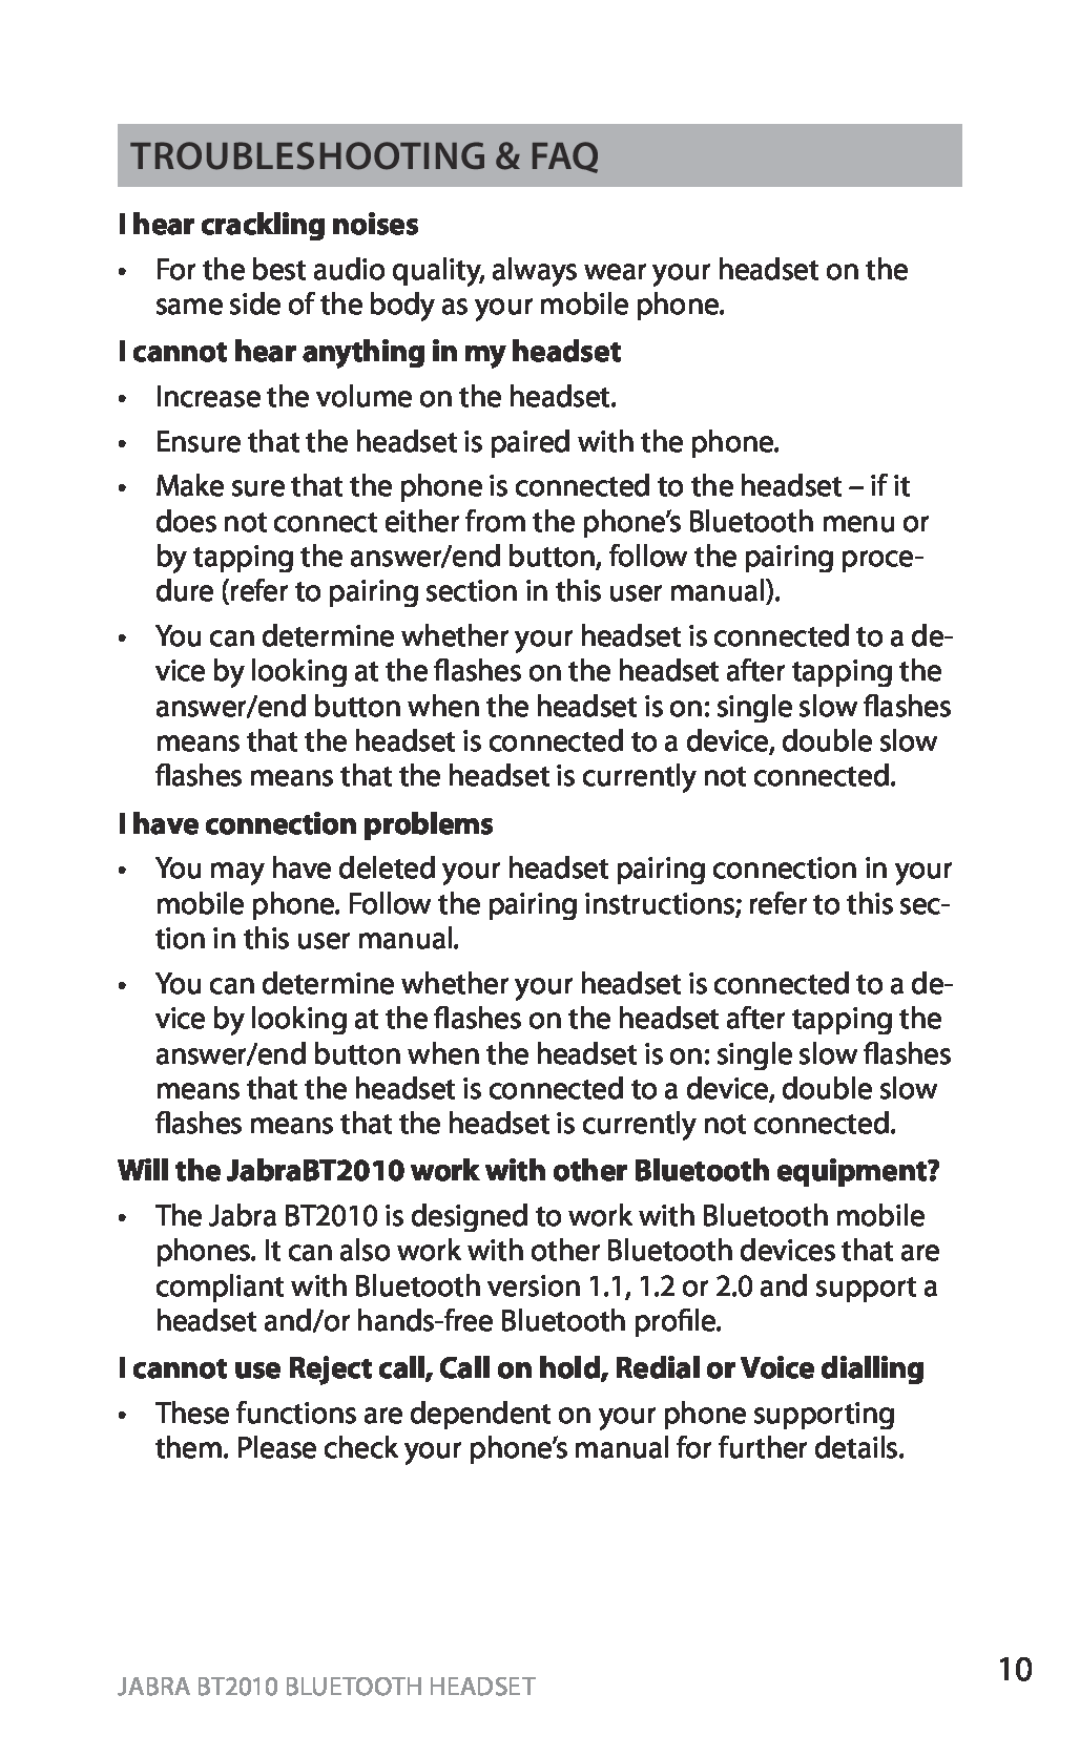 Jabra BT2010 user manual Troubleshooting & FAQ, I hear crackling noises, I cannot hear anything in my headset, english 